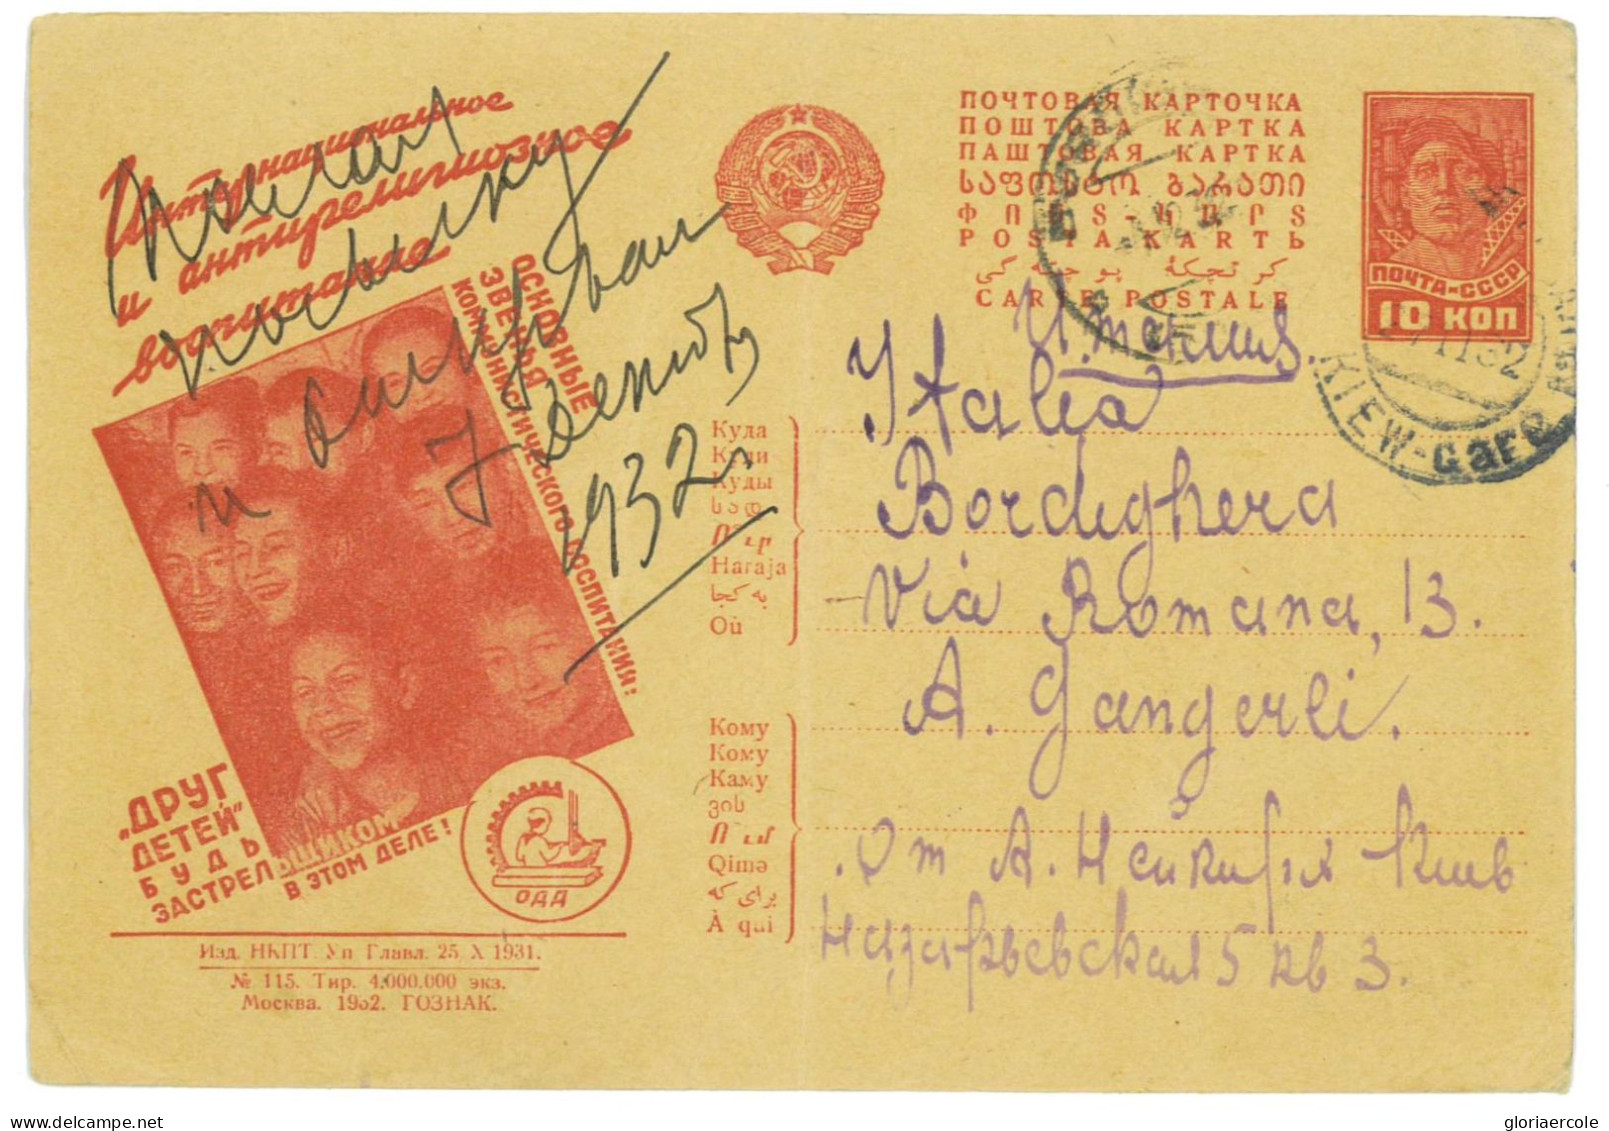 P2920 - RUSSIA , STATIONERY POST CARD MICHEL P127 /115 USED TO ITALY, 1932 - Covers & Documents